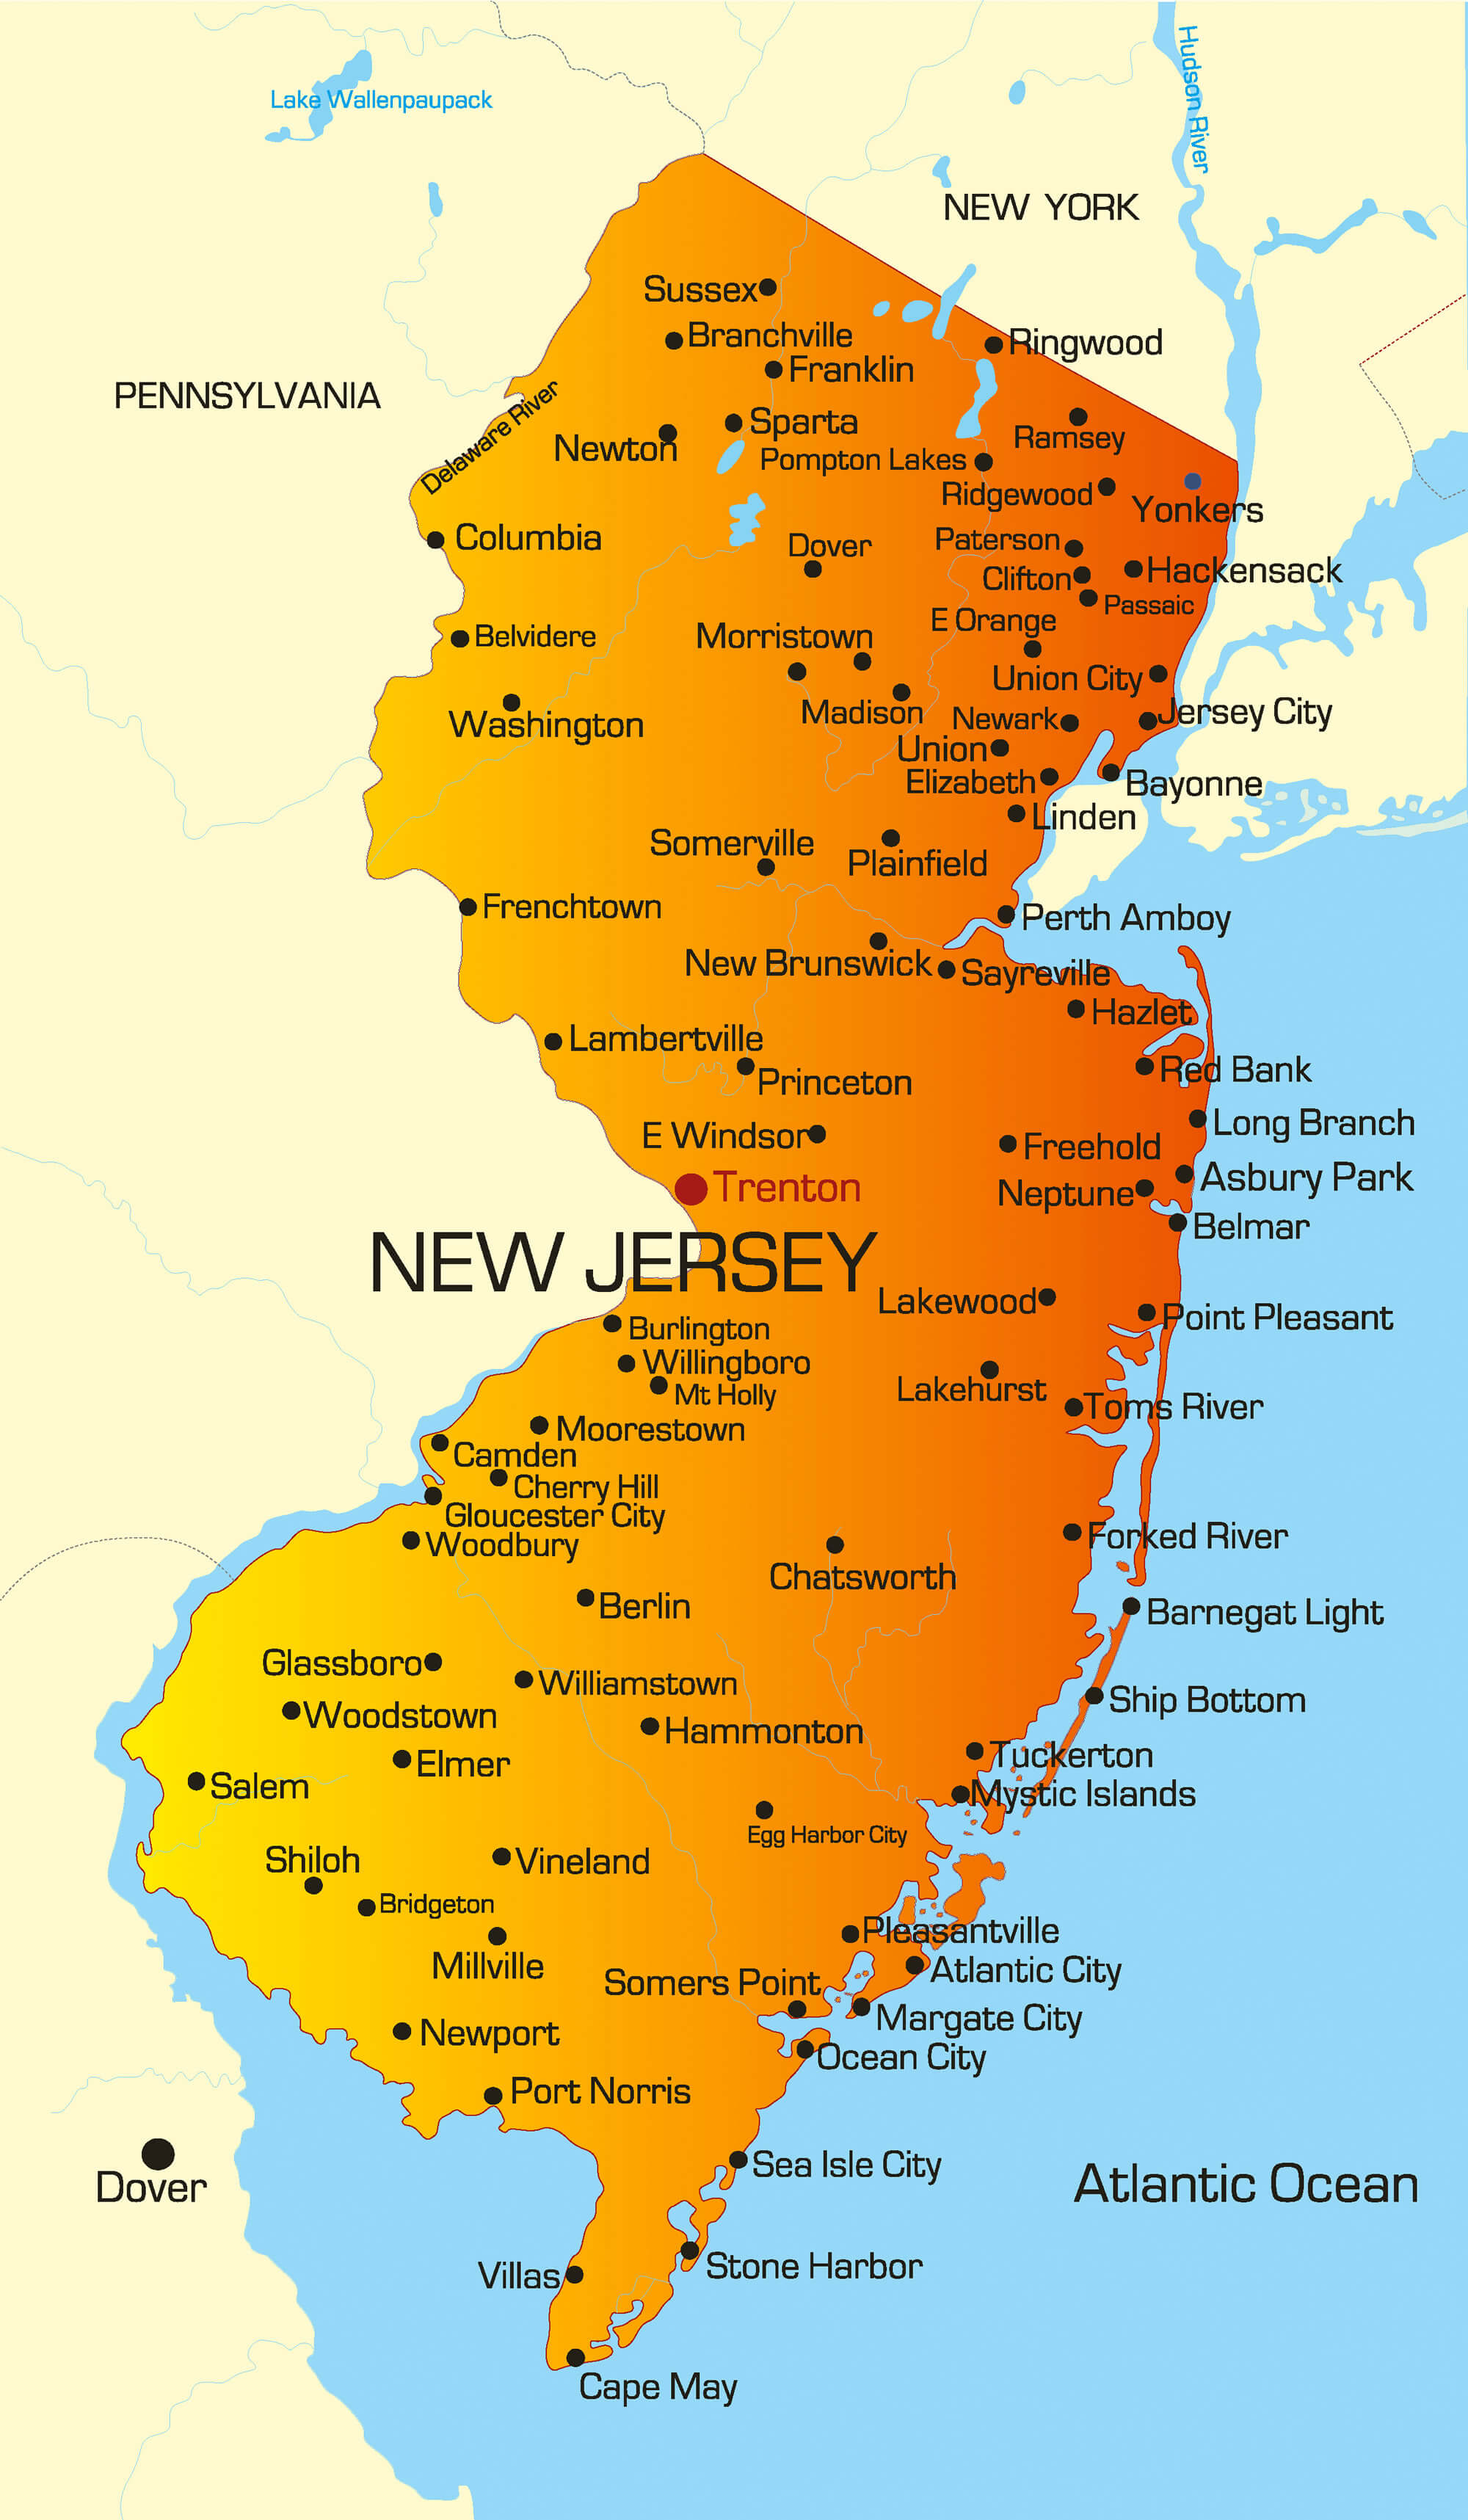 of New Jersey - Guide of the World